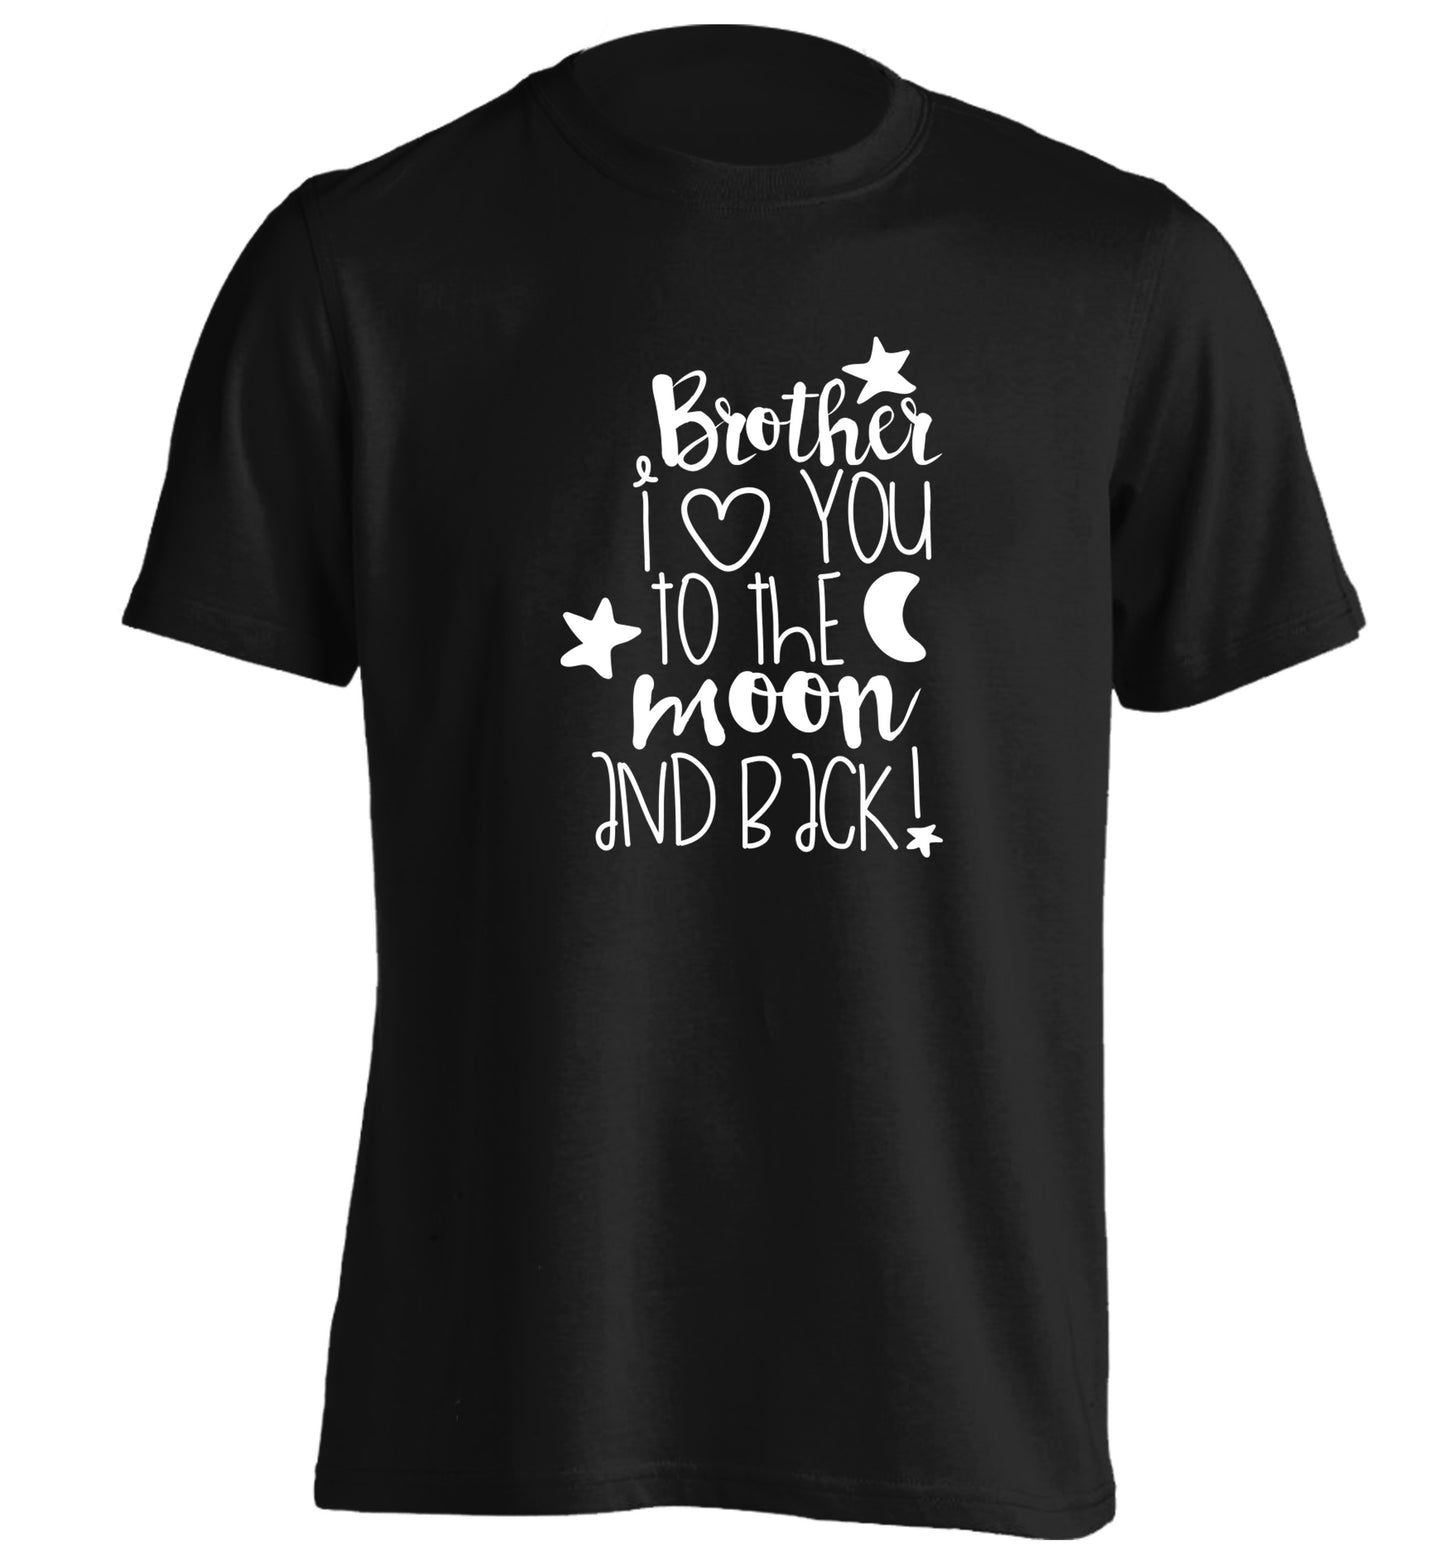 Brother I love you to the moon and back adults unisex black Tshirt 2XL